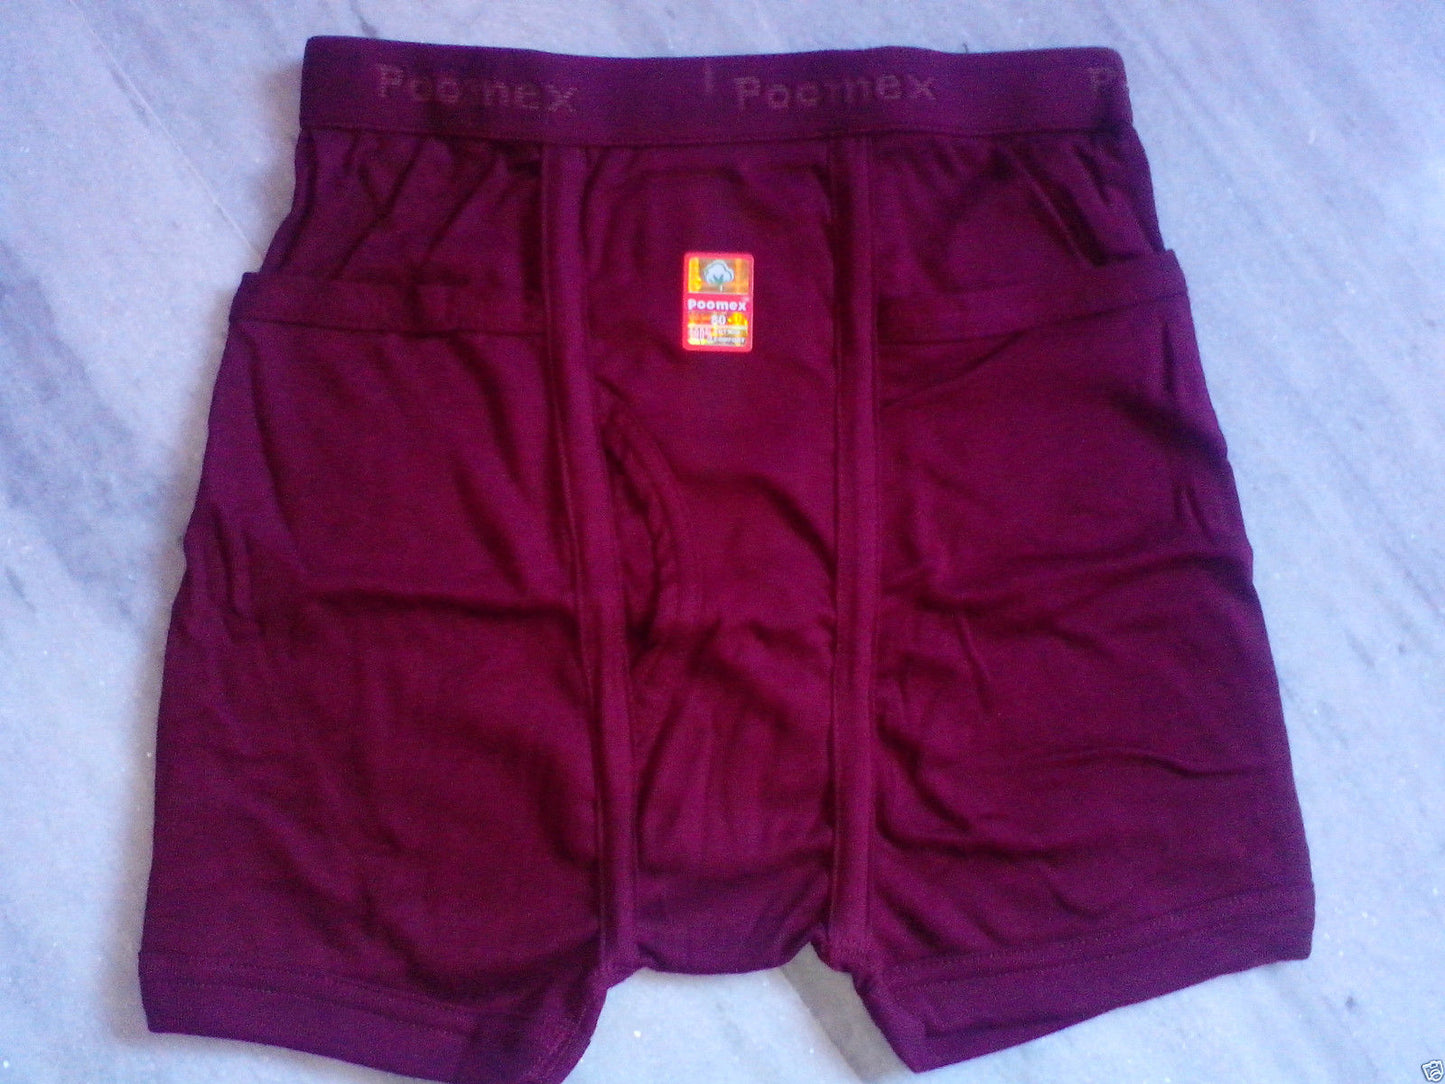 Poomex Gents Comfort P Trunks with Pocket